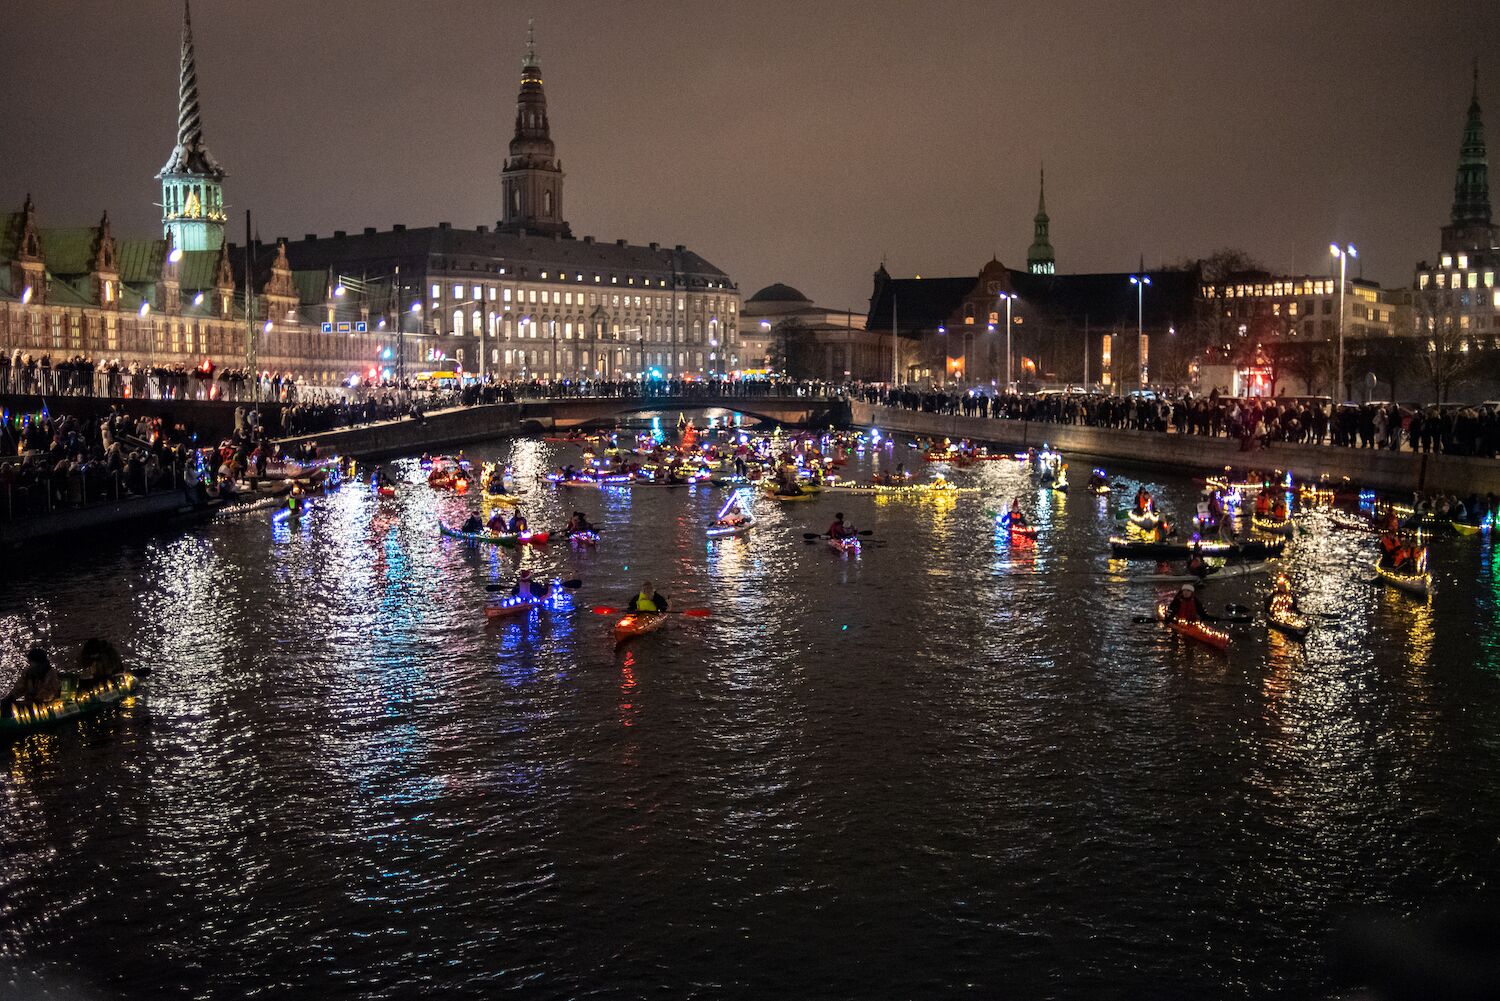 Danish people kayaking on Copenhagen's canals with lights and decorations on their boats